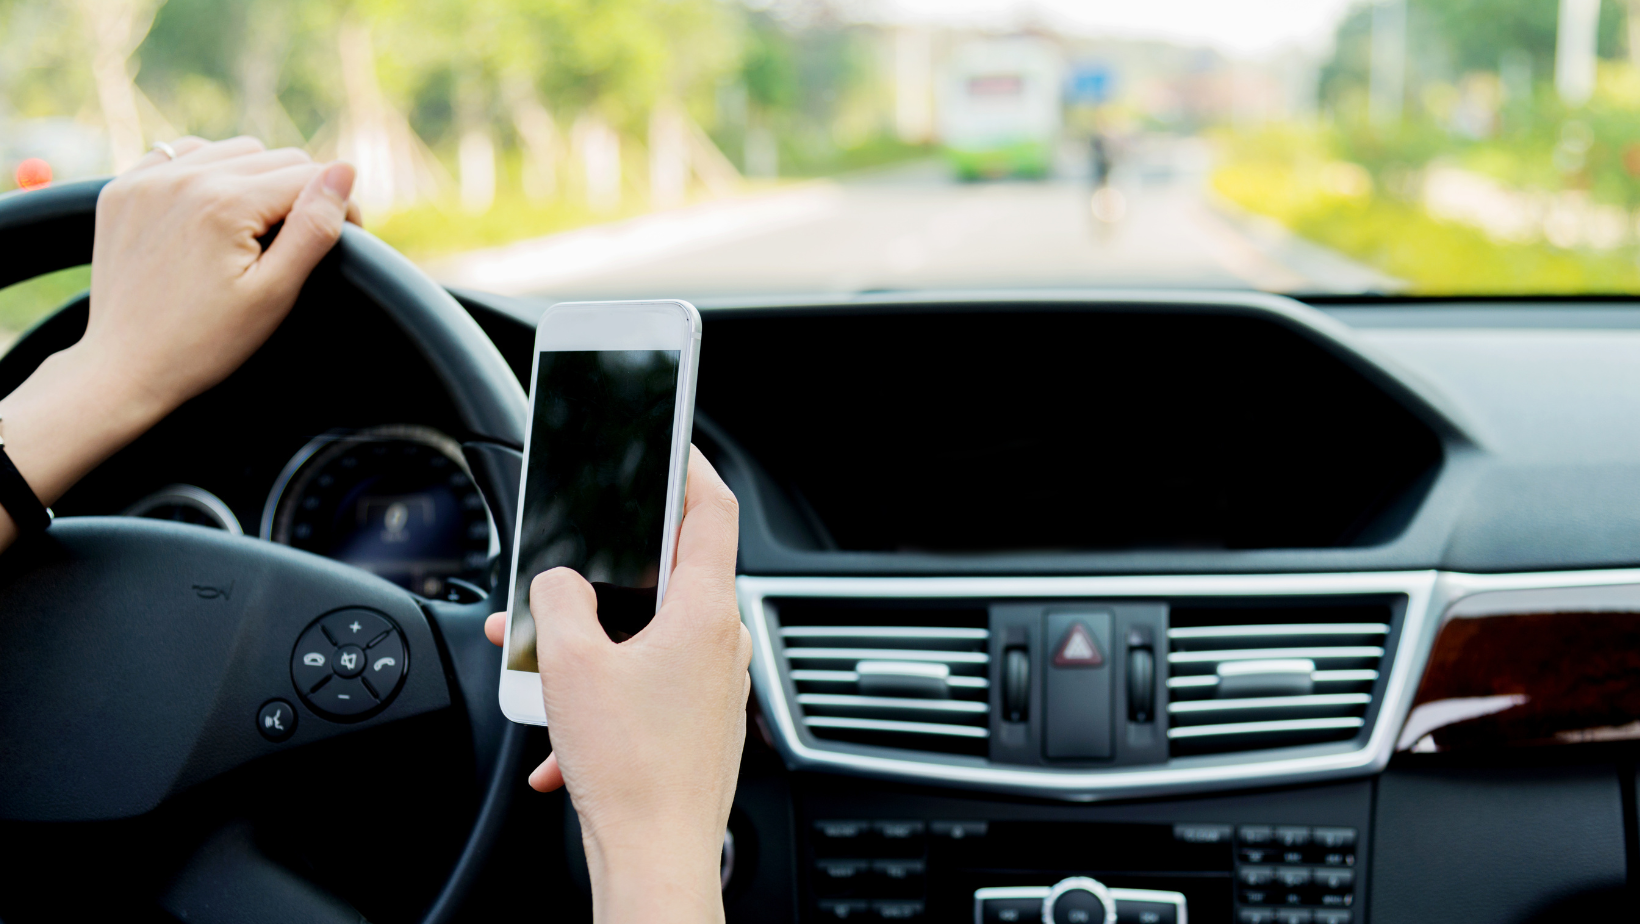 The Legal Consequences of Texting While Driving: Penalties, Fines, and License Points